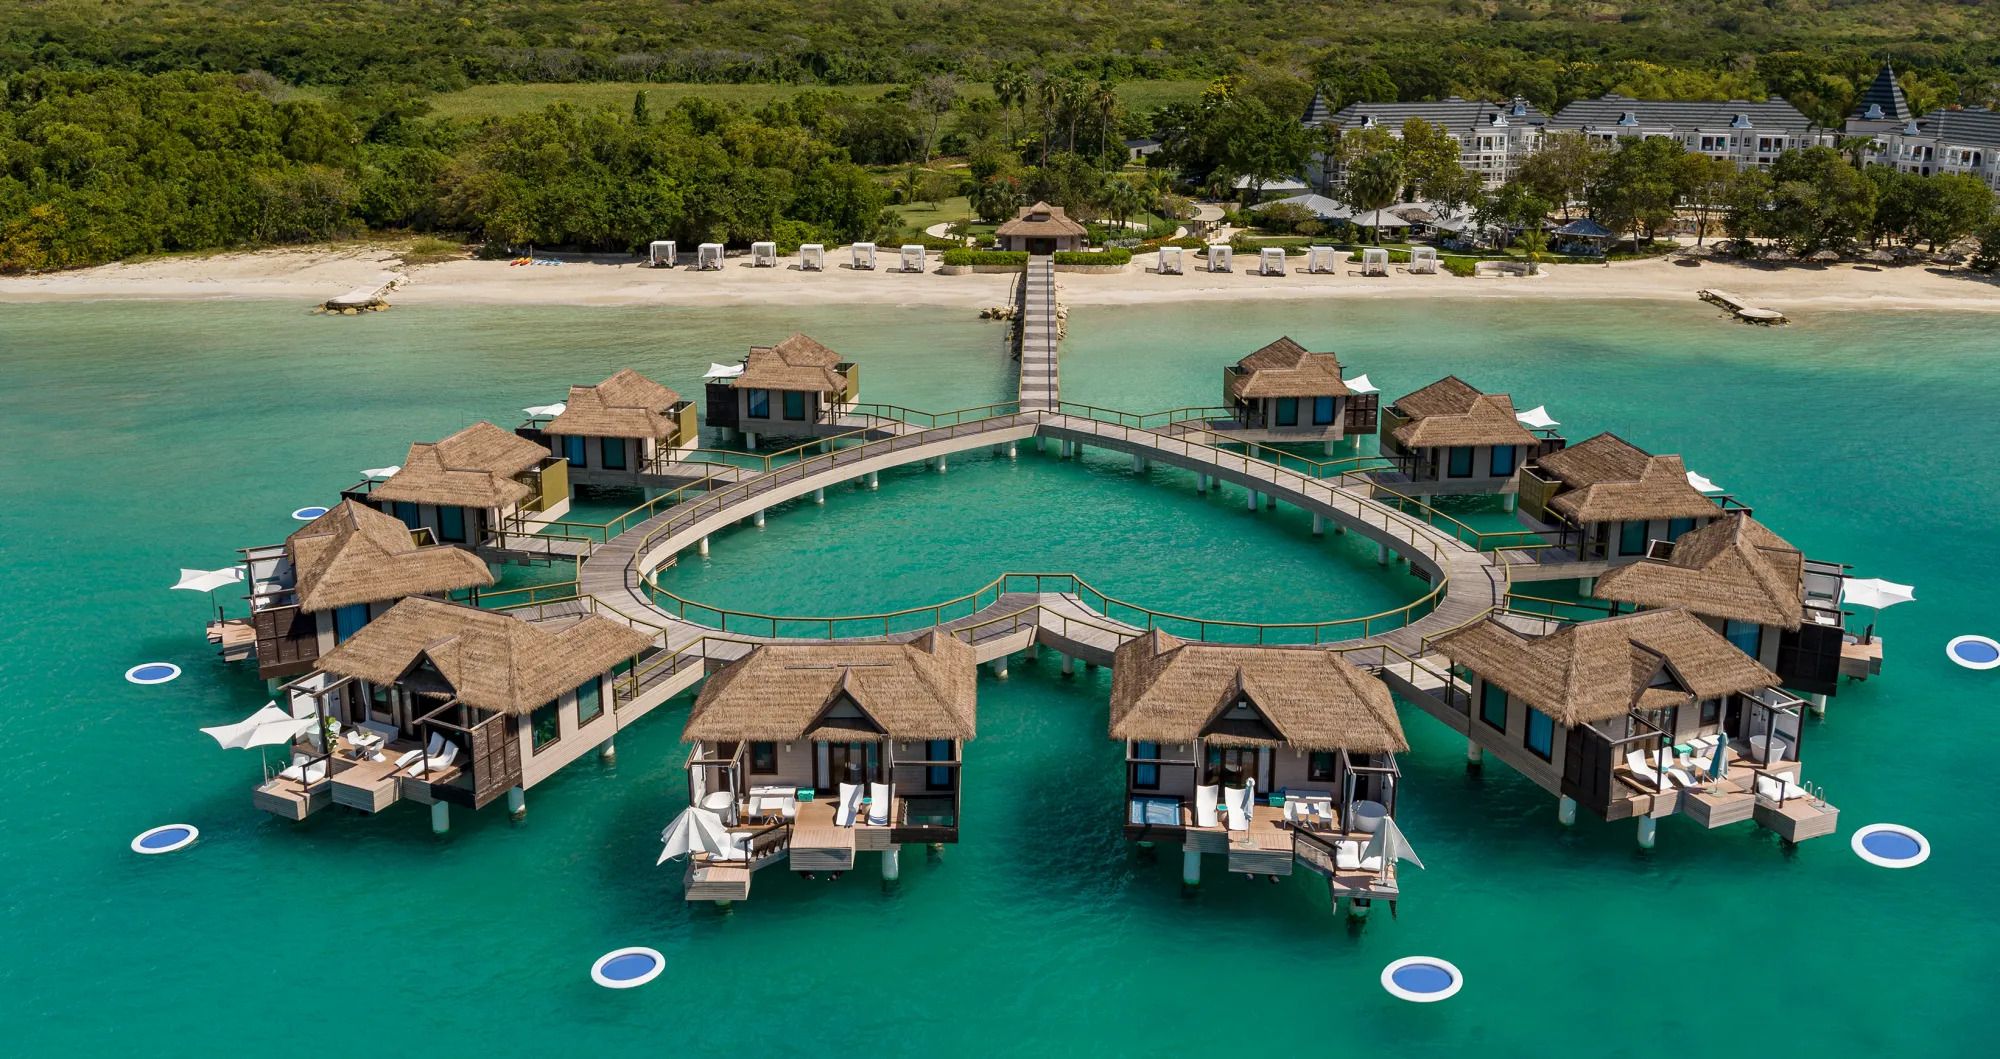 sandals-south-coast-overwater-bungalows-jpg-1